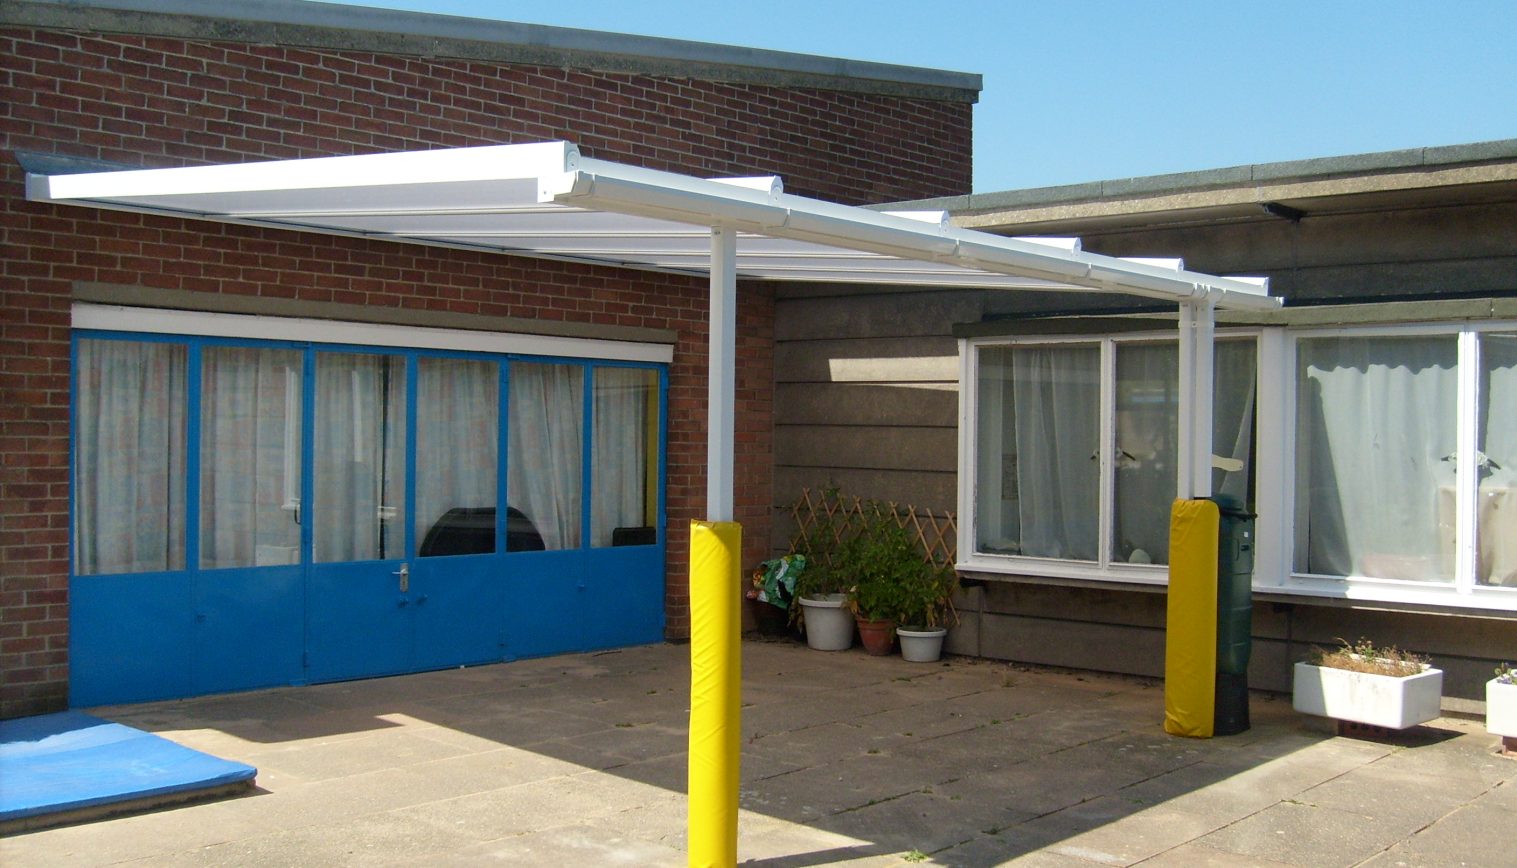 Whitehouse Infant School – Wall Mounted Canopy